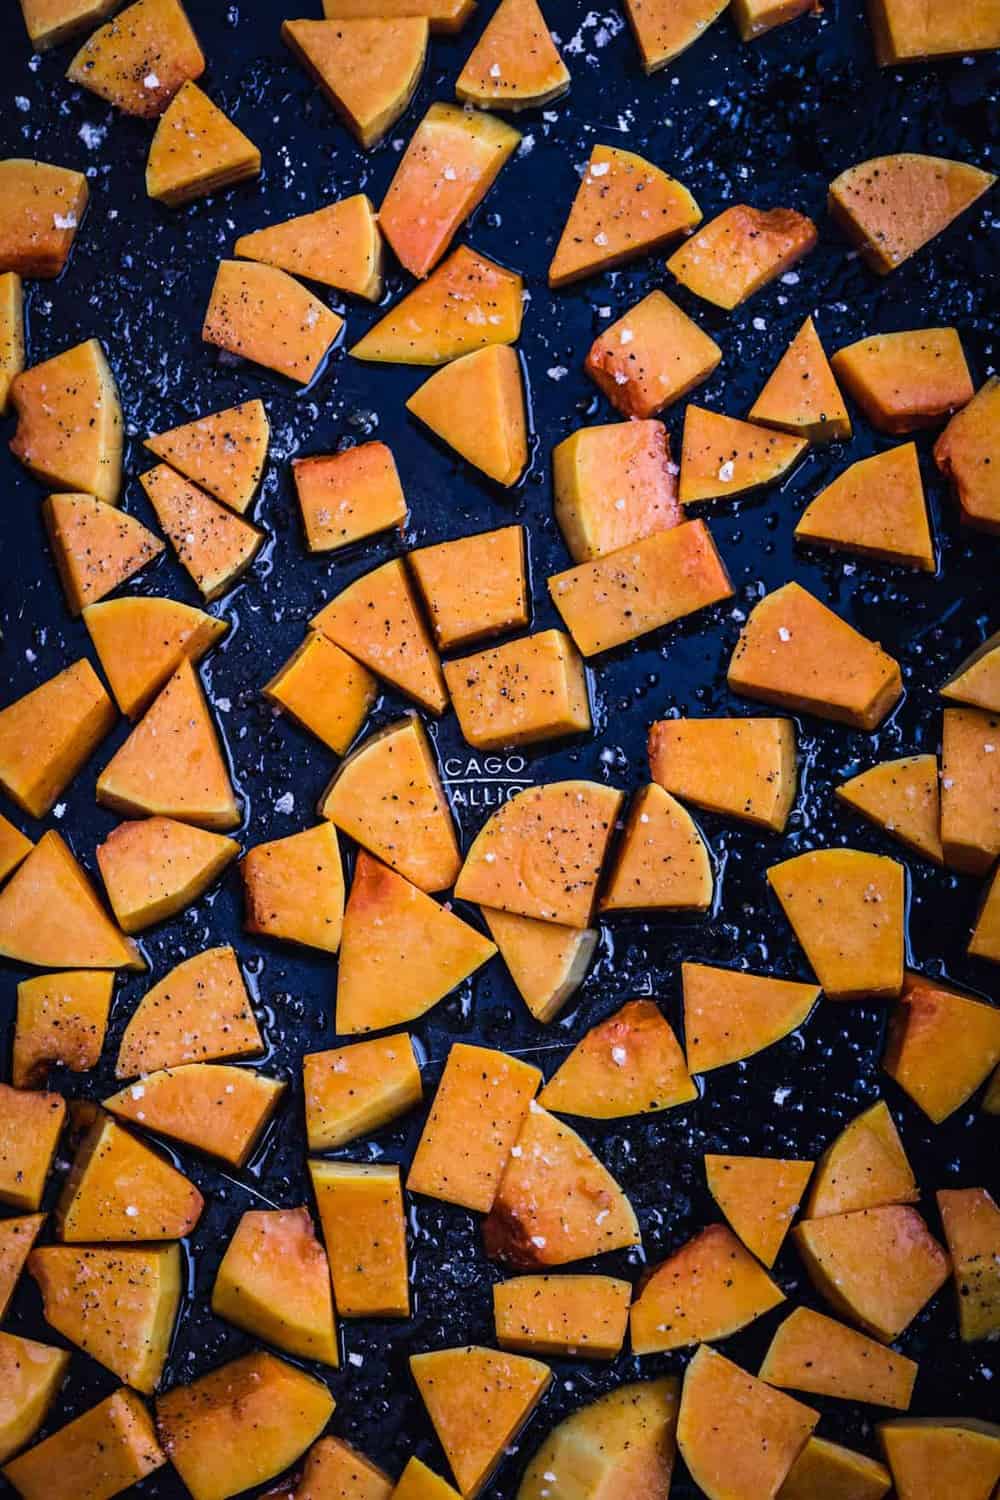 Cut up squash, on a baking sheet, pre-oven.